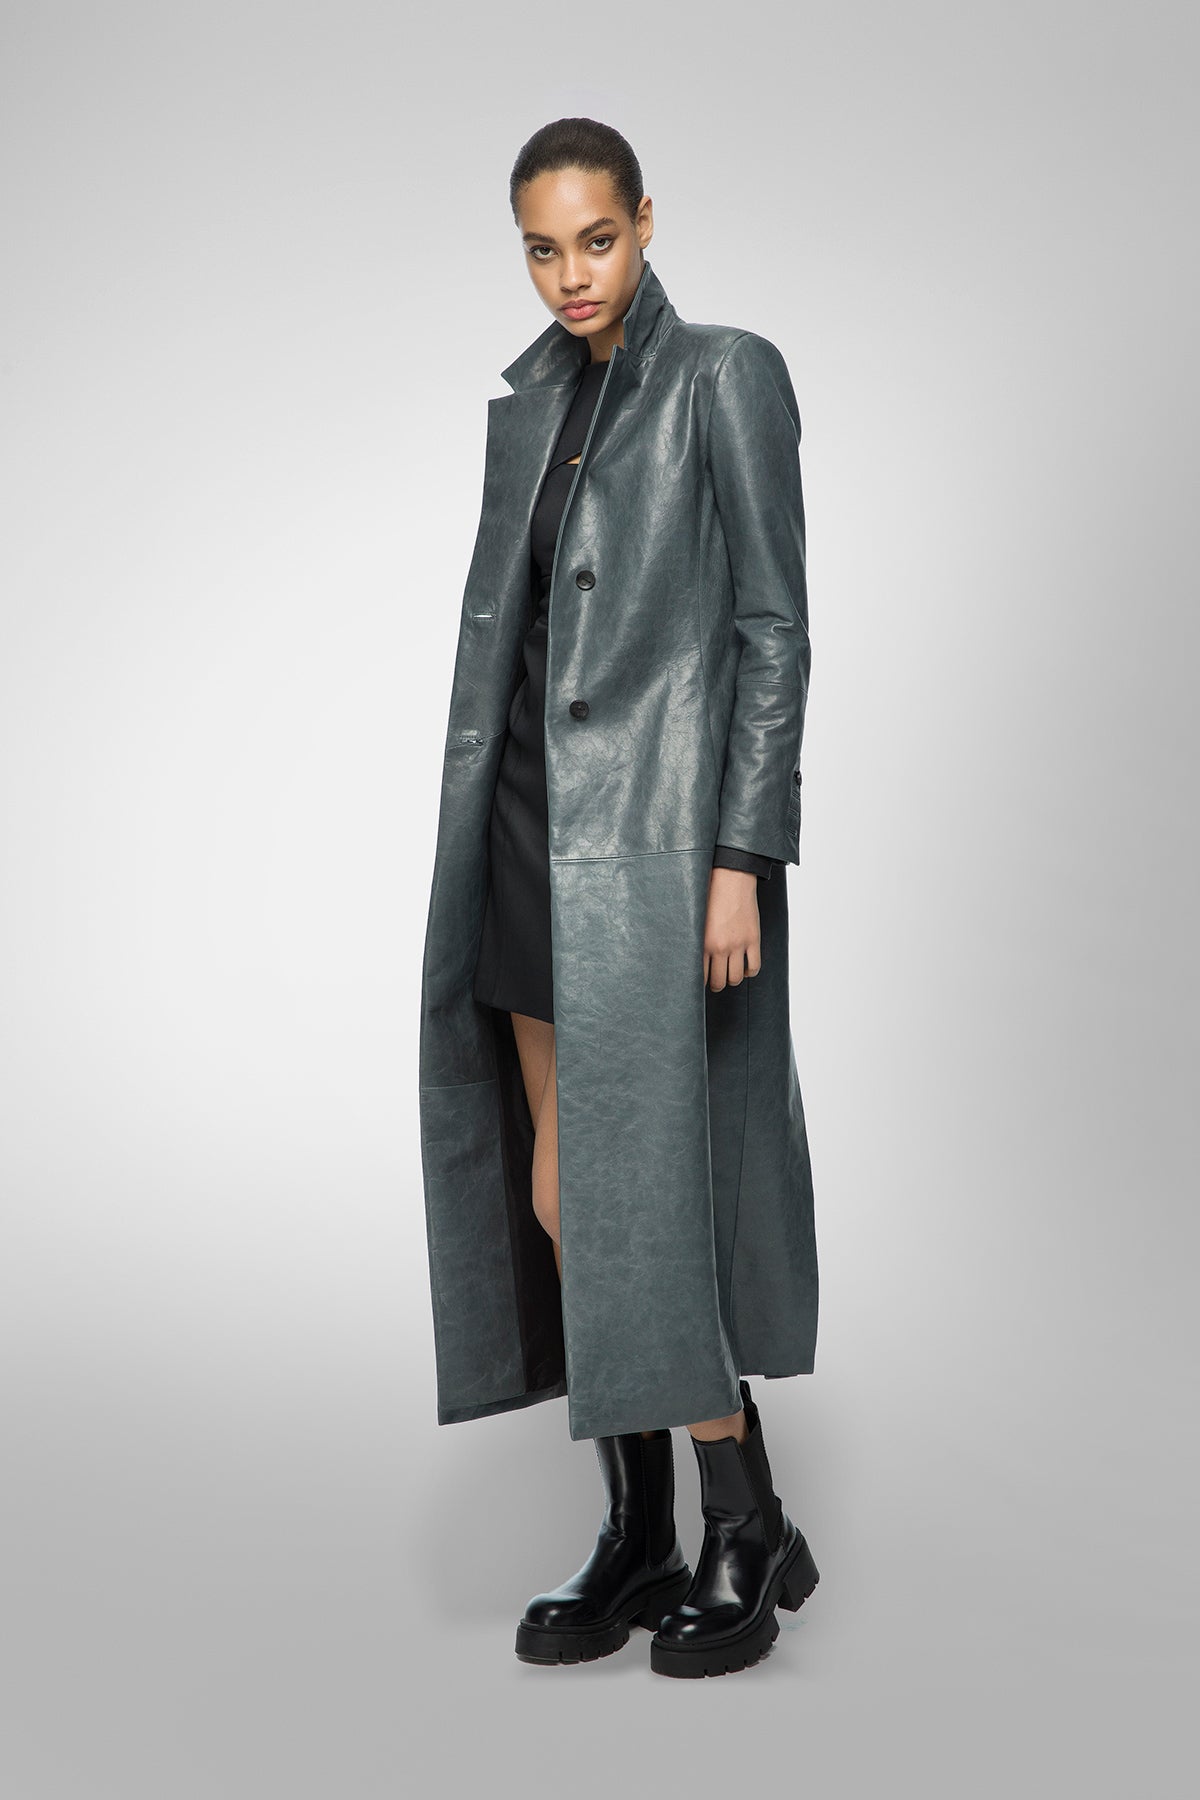 Timeless Leather & Shearling Jackets, Coats and Vests | VSP – Page 2 ...